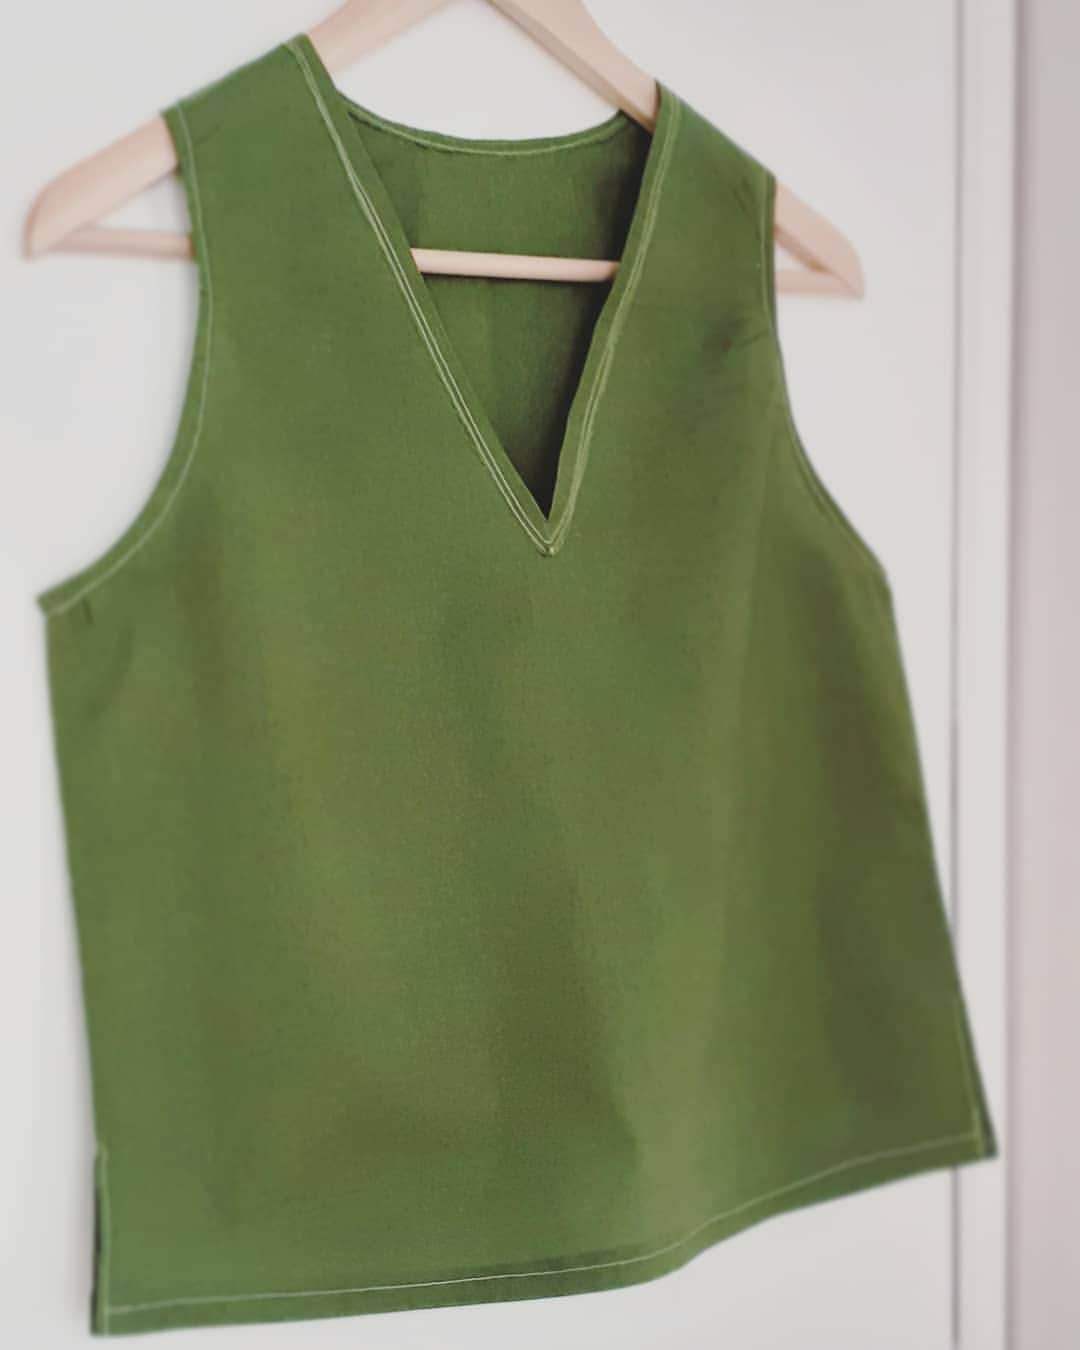 Irisのインスタグラム：「⠀ Grass green sleeveless top is ready for summer 🌱 (100% cotton) ⠀ ⒾⓇⒾⓈ #iris #style #fashion #beauty #instagood #love #inspiration #happy #cute #photooftheday #like4like #picoftheday #followme #me #follow #art #instadaily #friends #repost #fun #smile #sewing #handmade #mypieces #fitting #mood #doit #staytuned #irisisback」